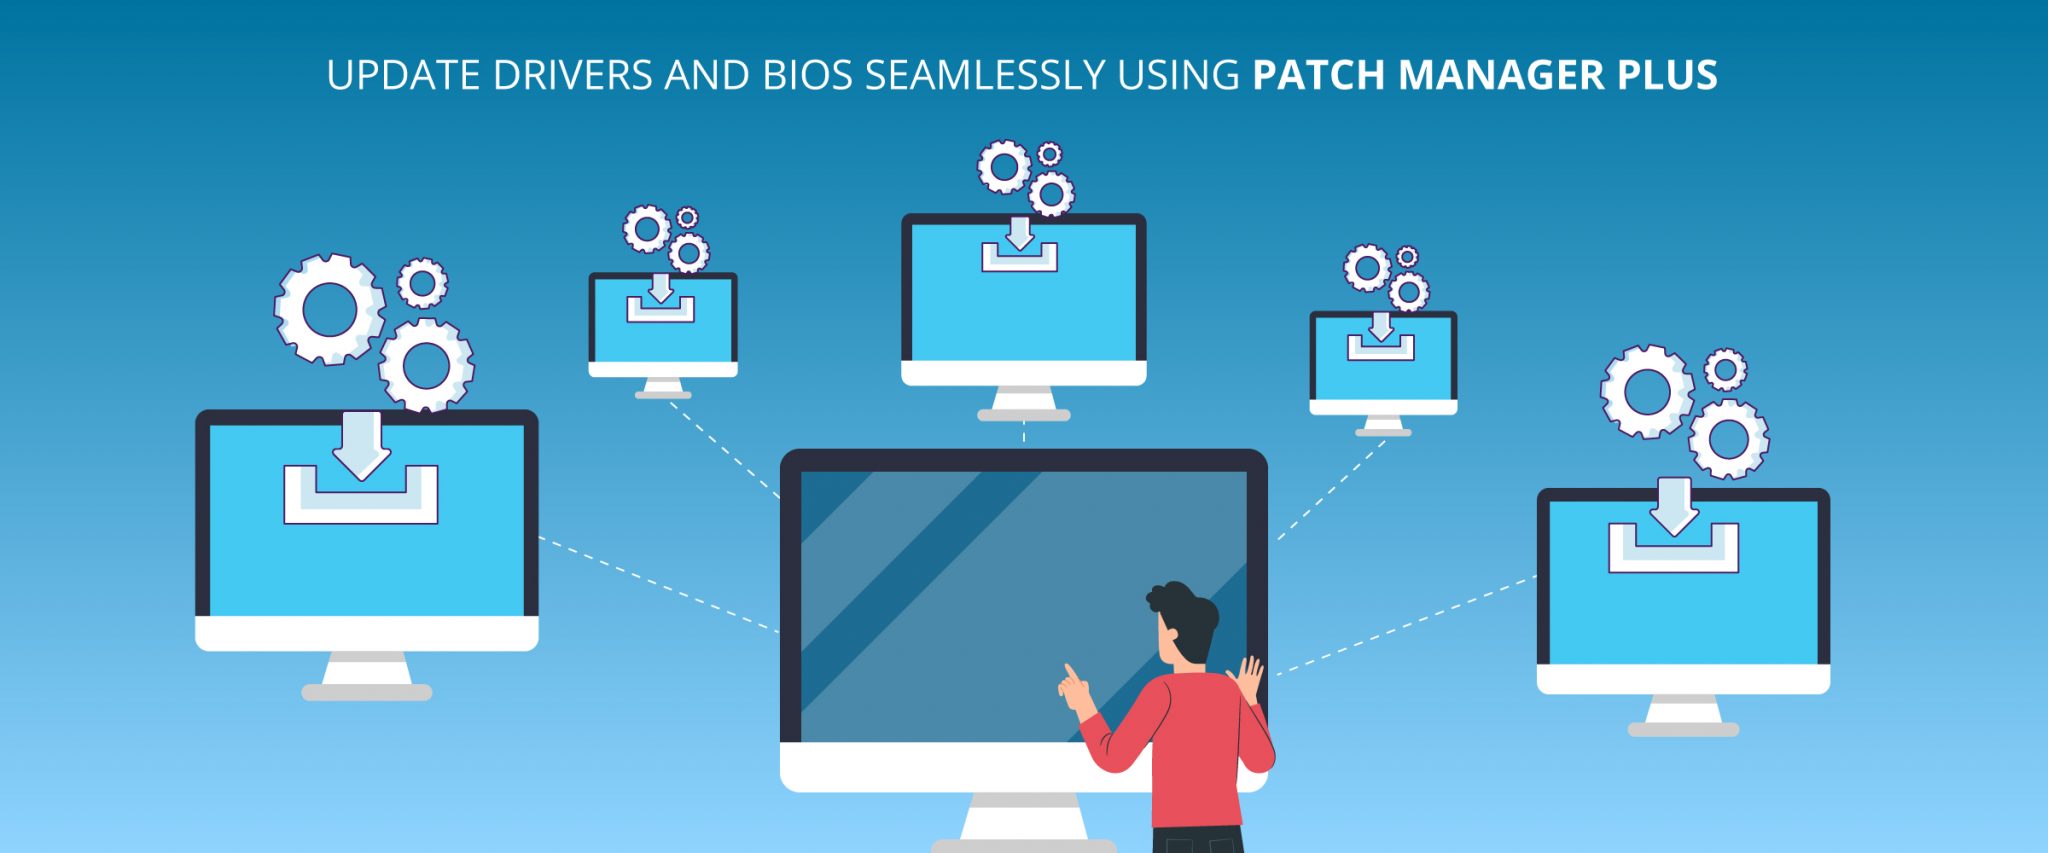 Patch Manager Plus now offers support for drivers and BIOS updates